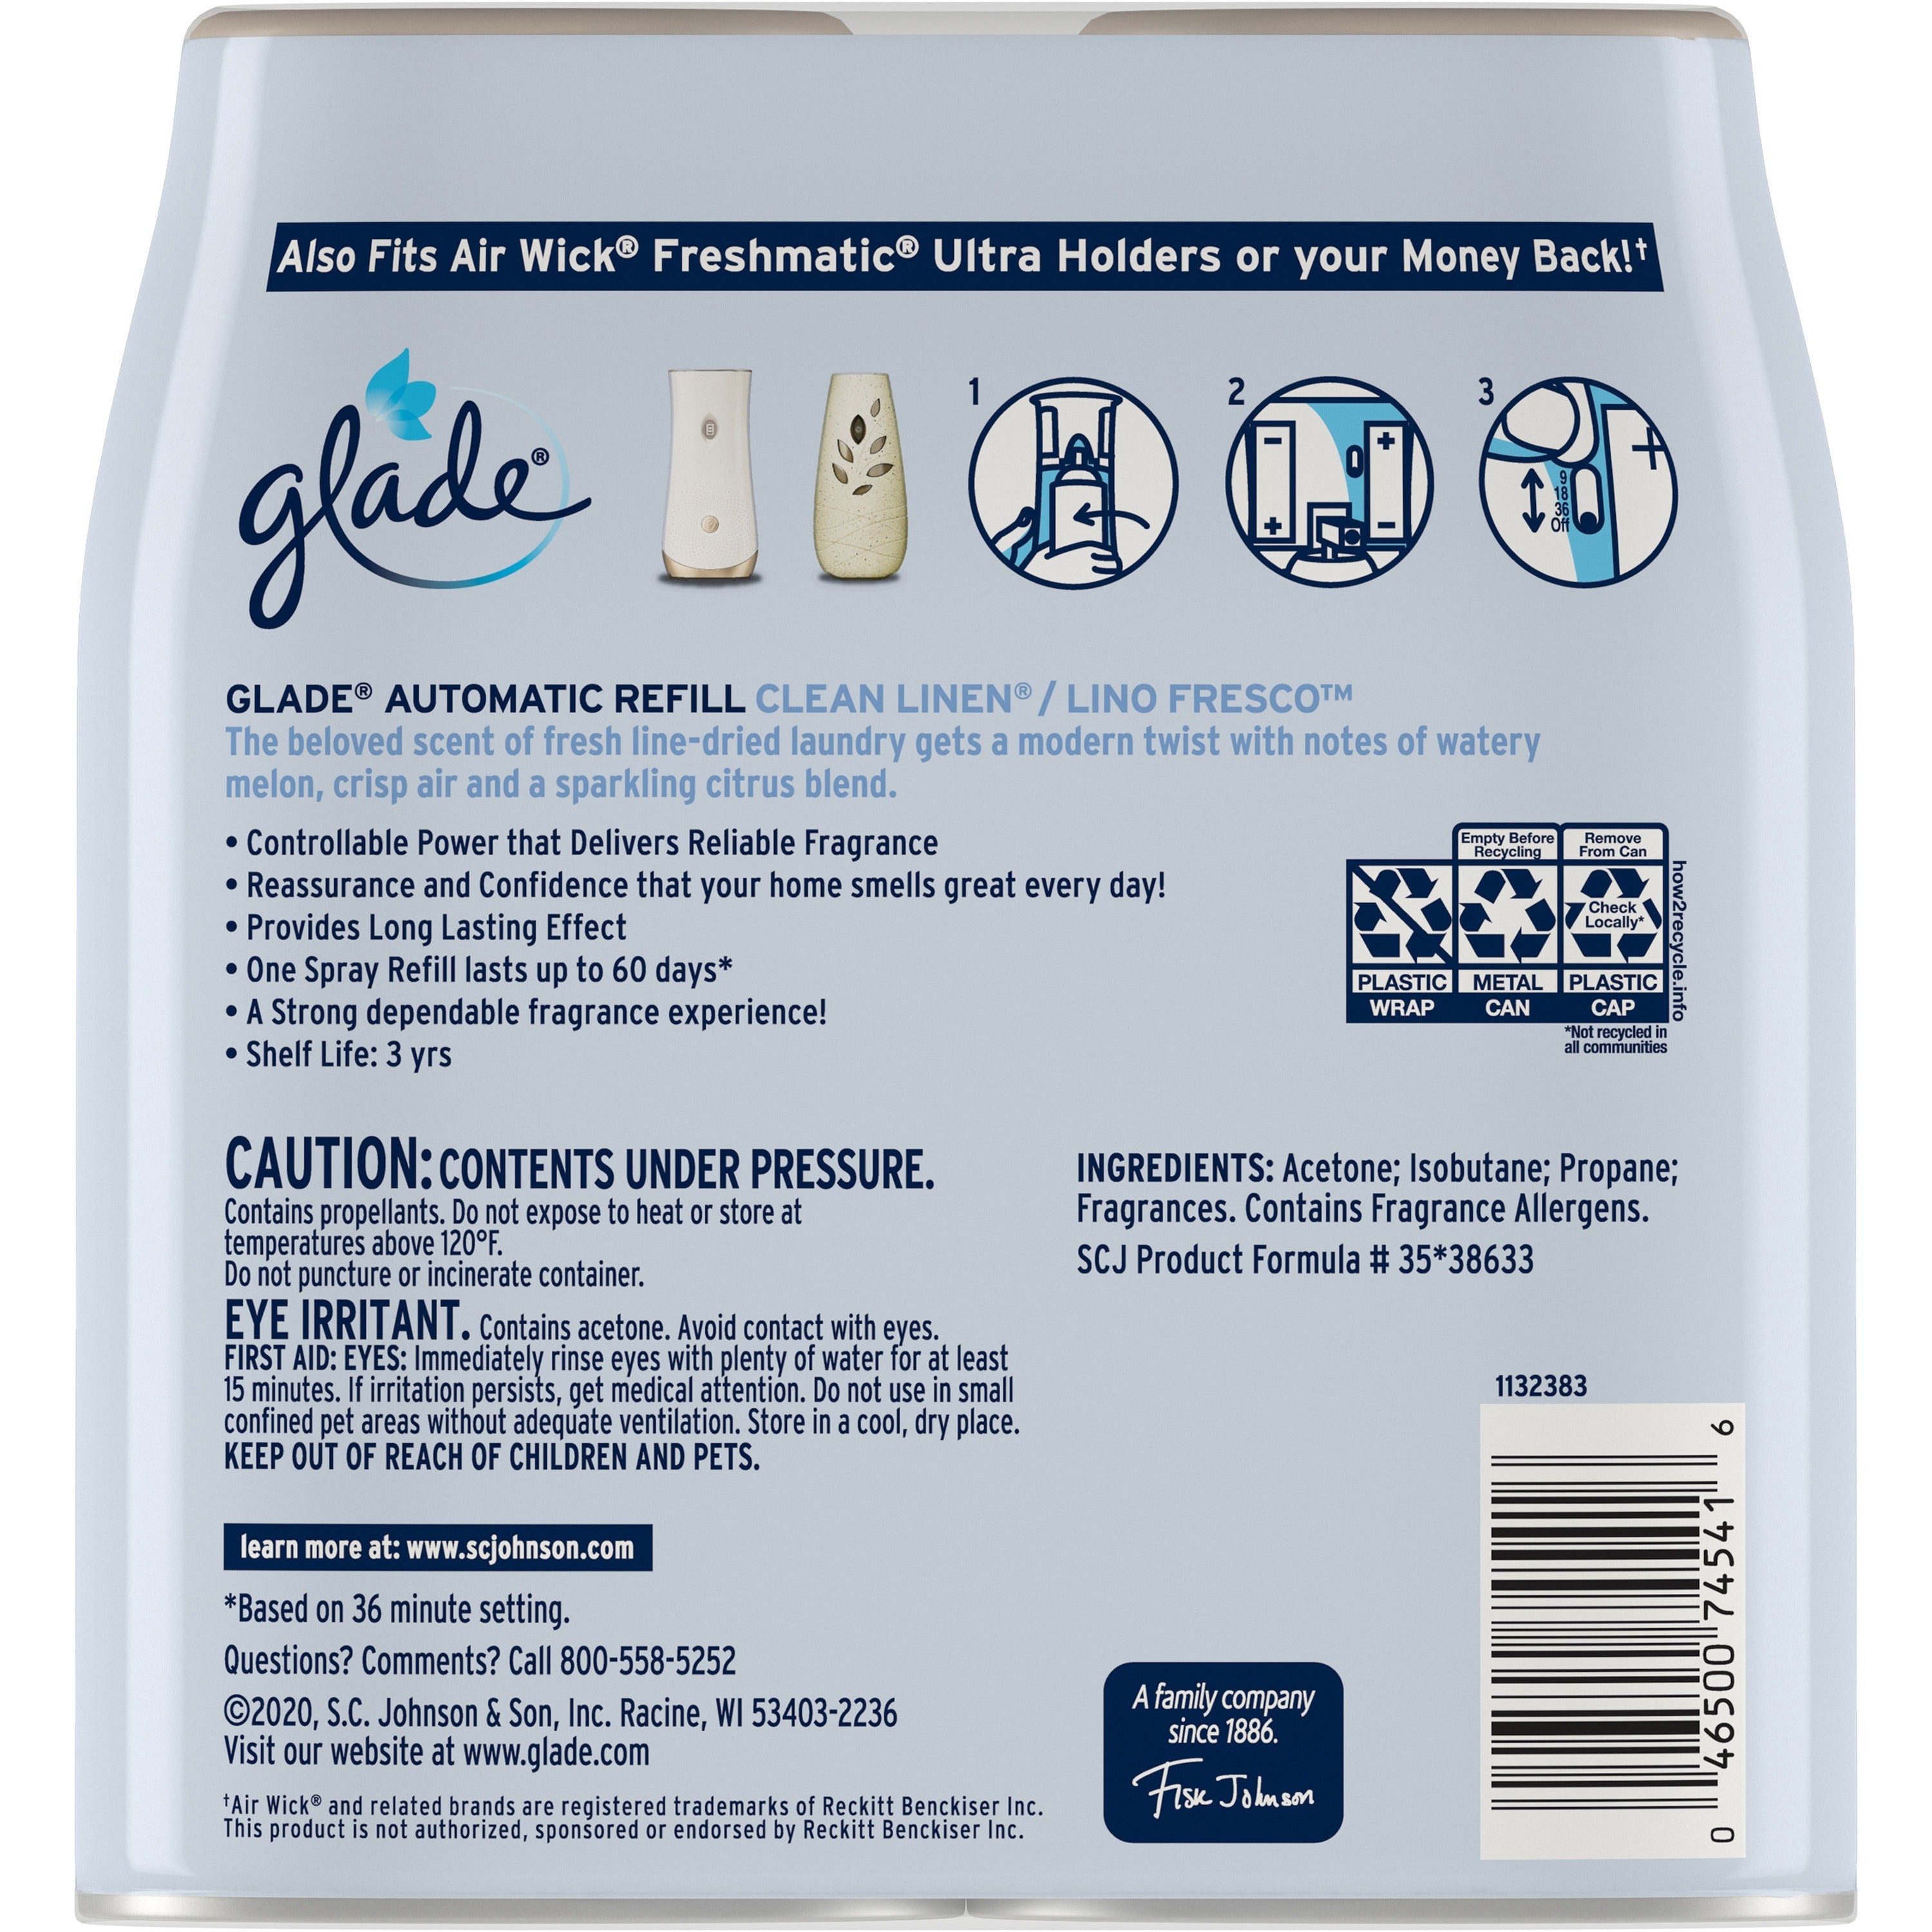 glade-automatic-spray-refill-value-pack-1240-oz-clean-linen-60-day-2-pack-long-lasting-phthalate-free-paraben-free-formaldehyde-free_sjn329388 - 3